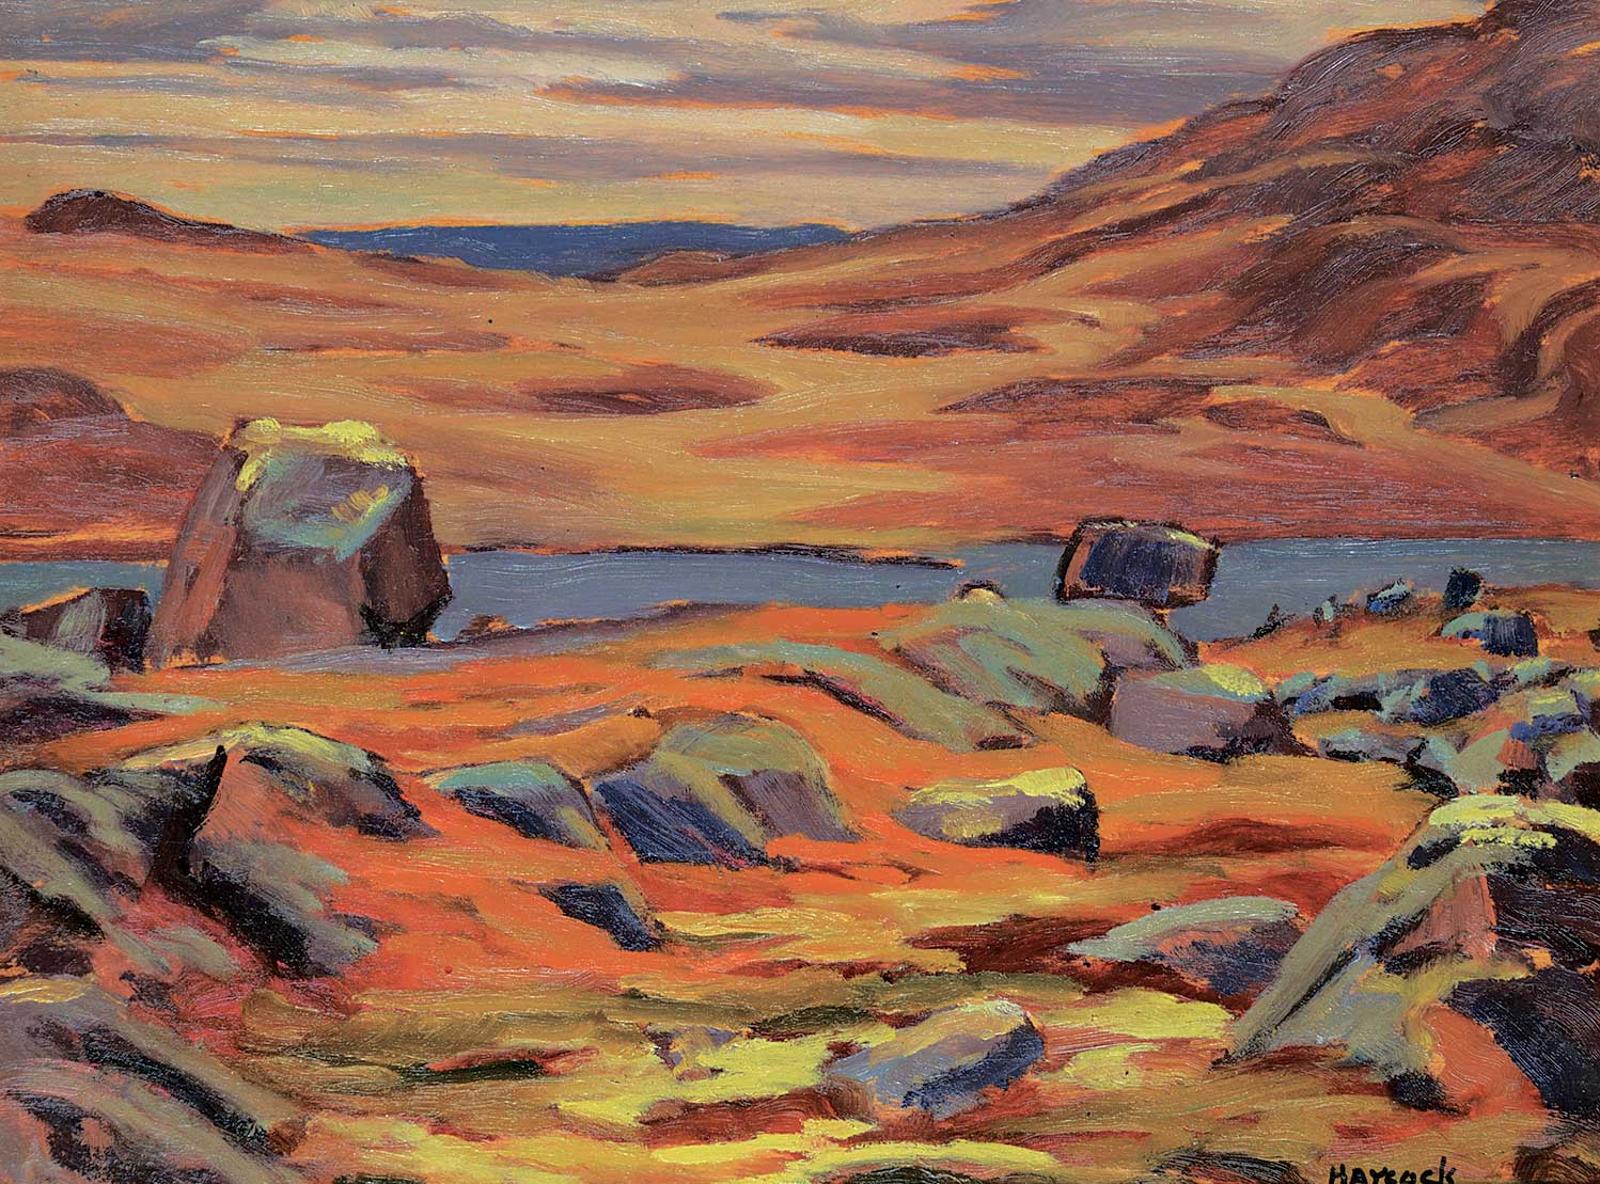 Maurice Hall Haycock (1900-1988) - Lake in the Barren Lands